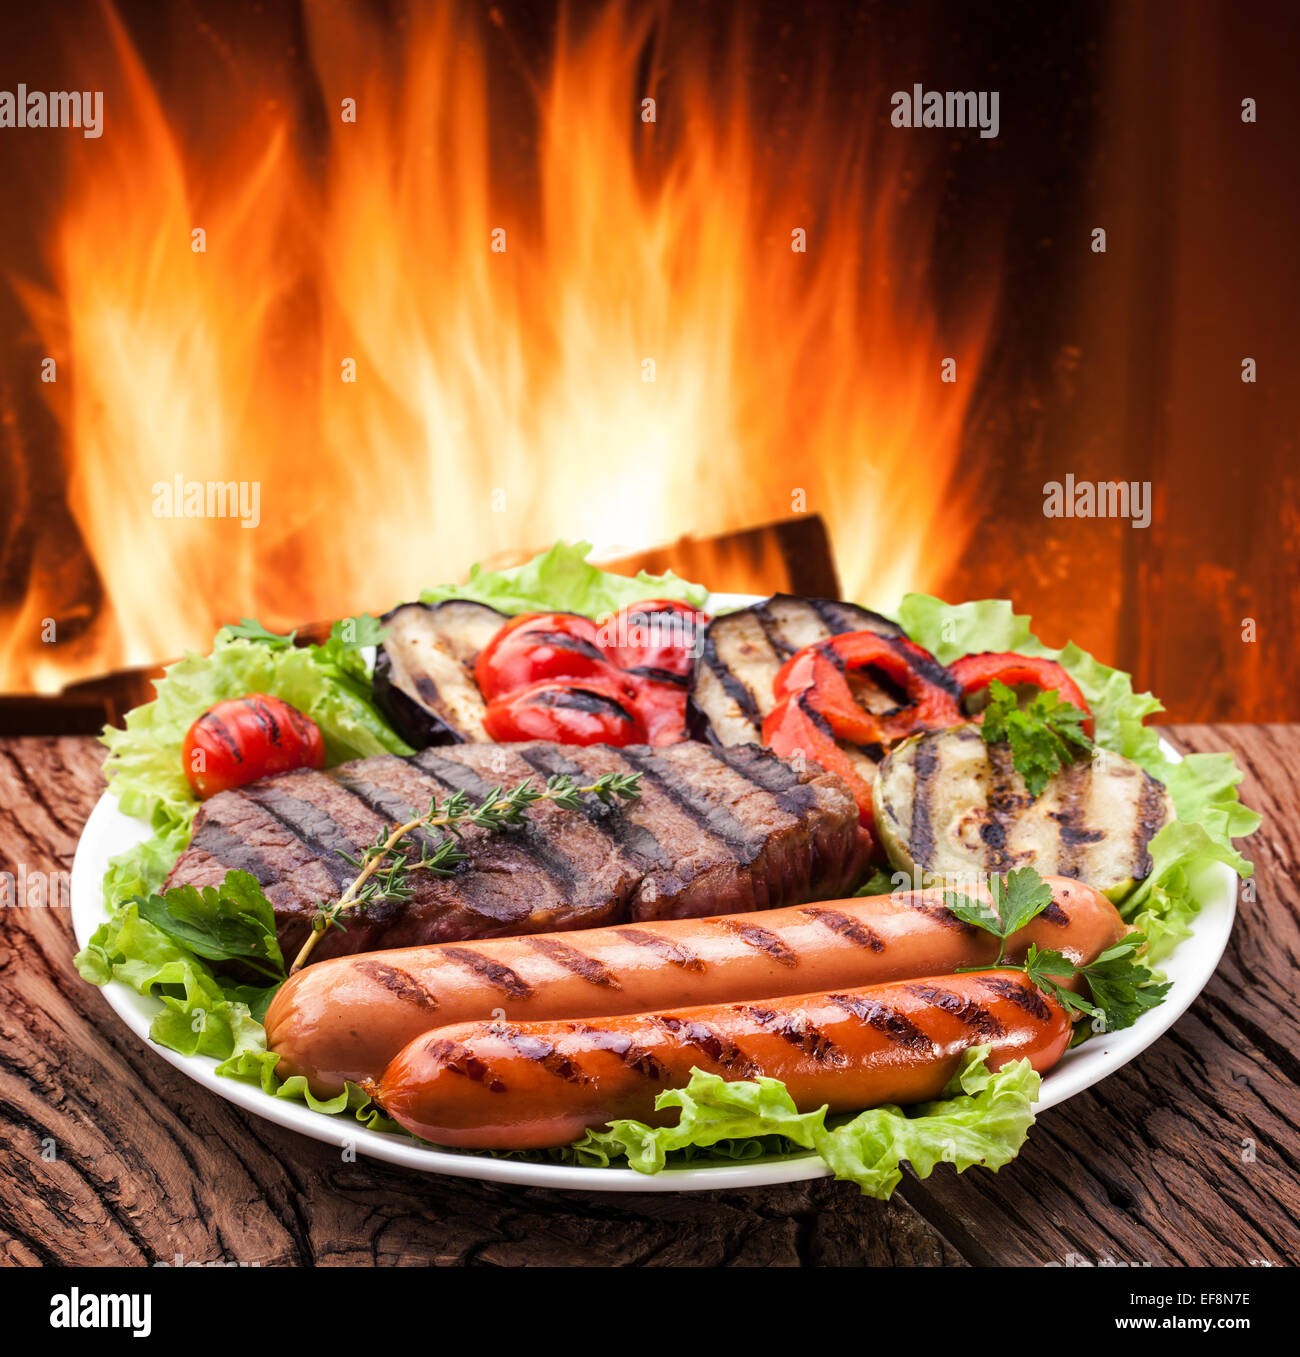 Grill: steak, sausage and vegetable on a plate. In the background - the fire. Stock Photo